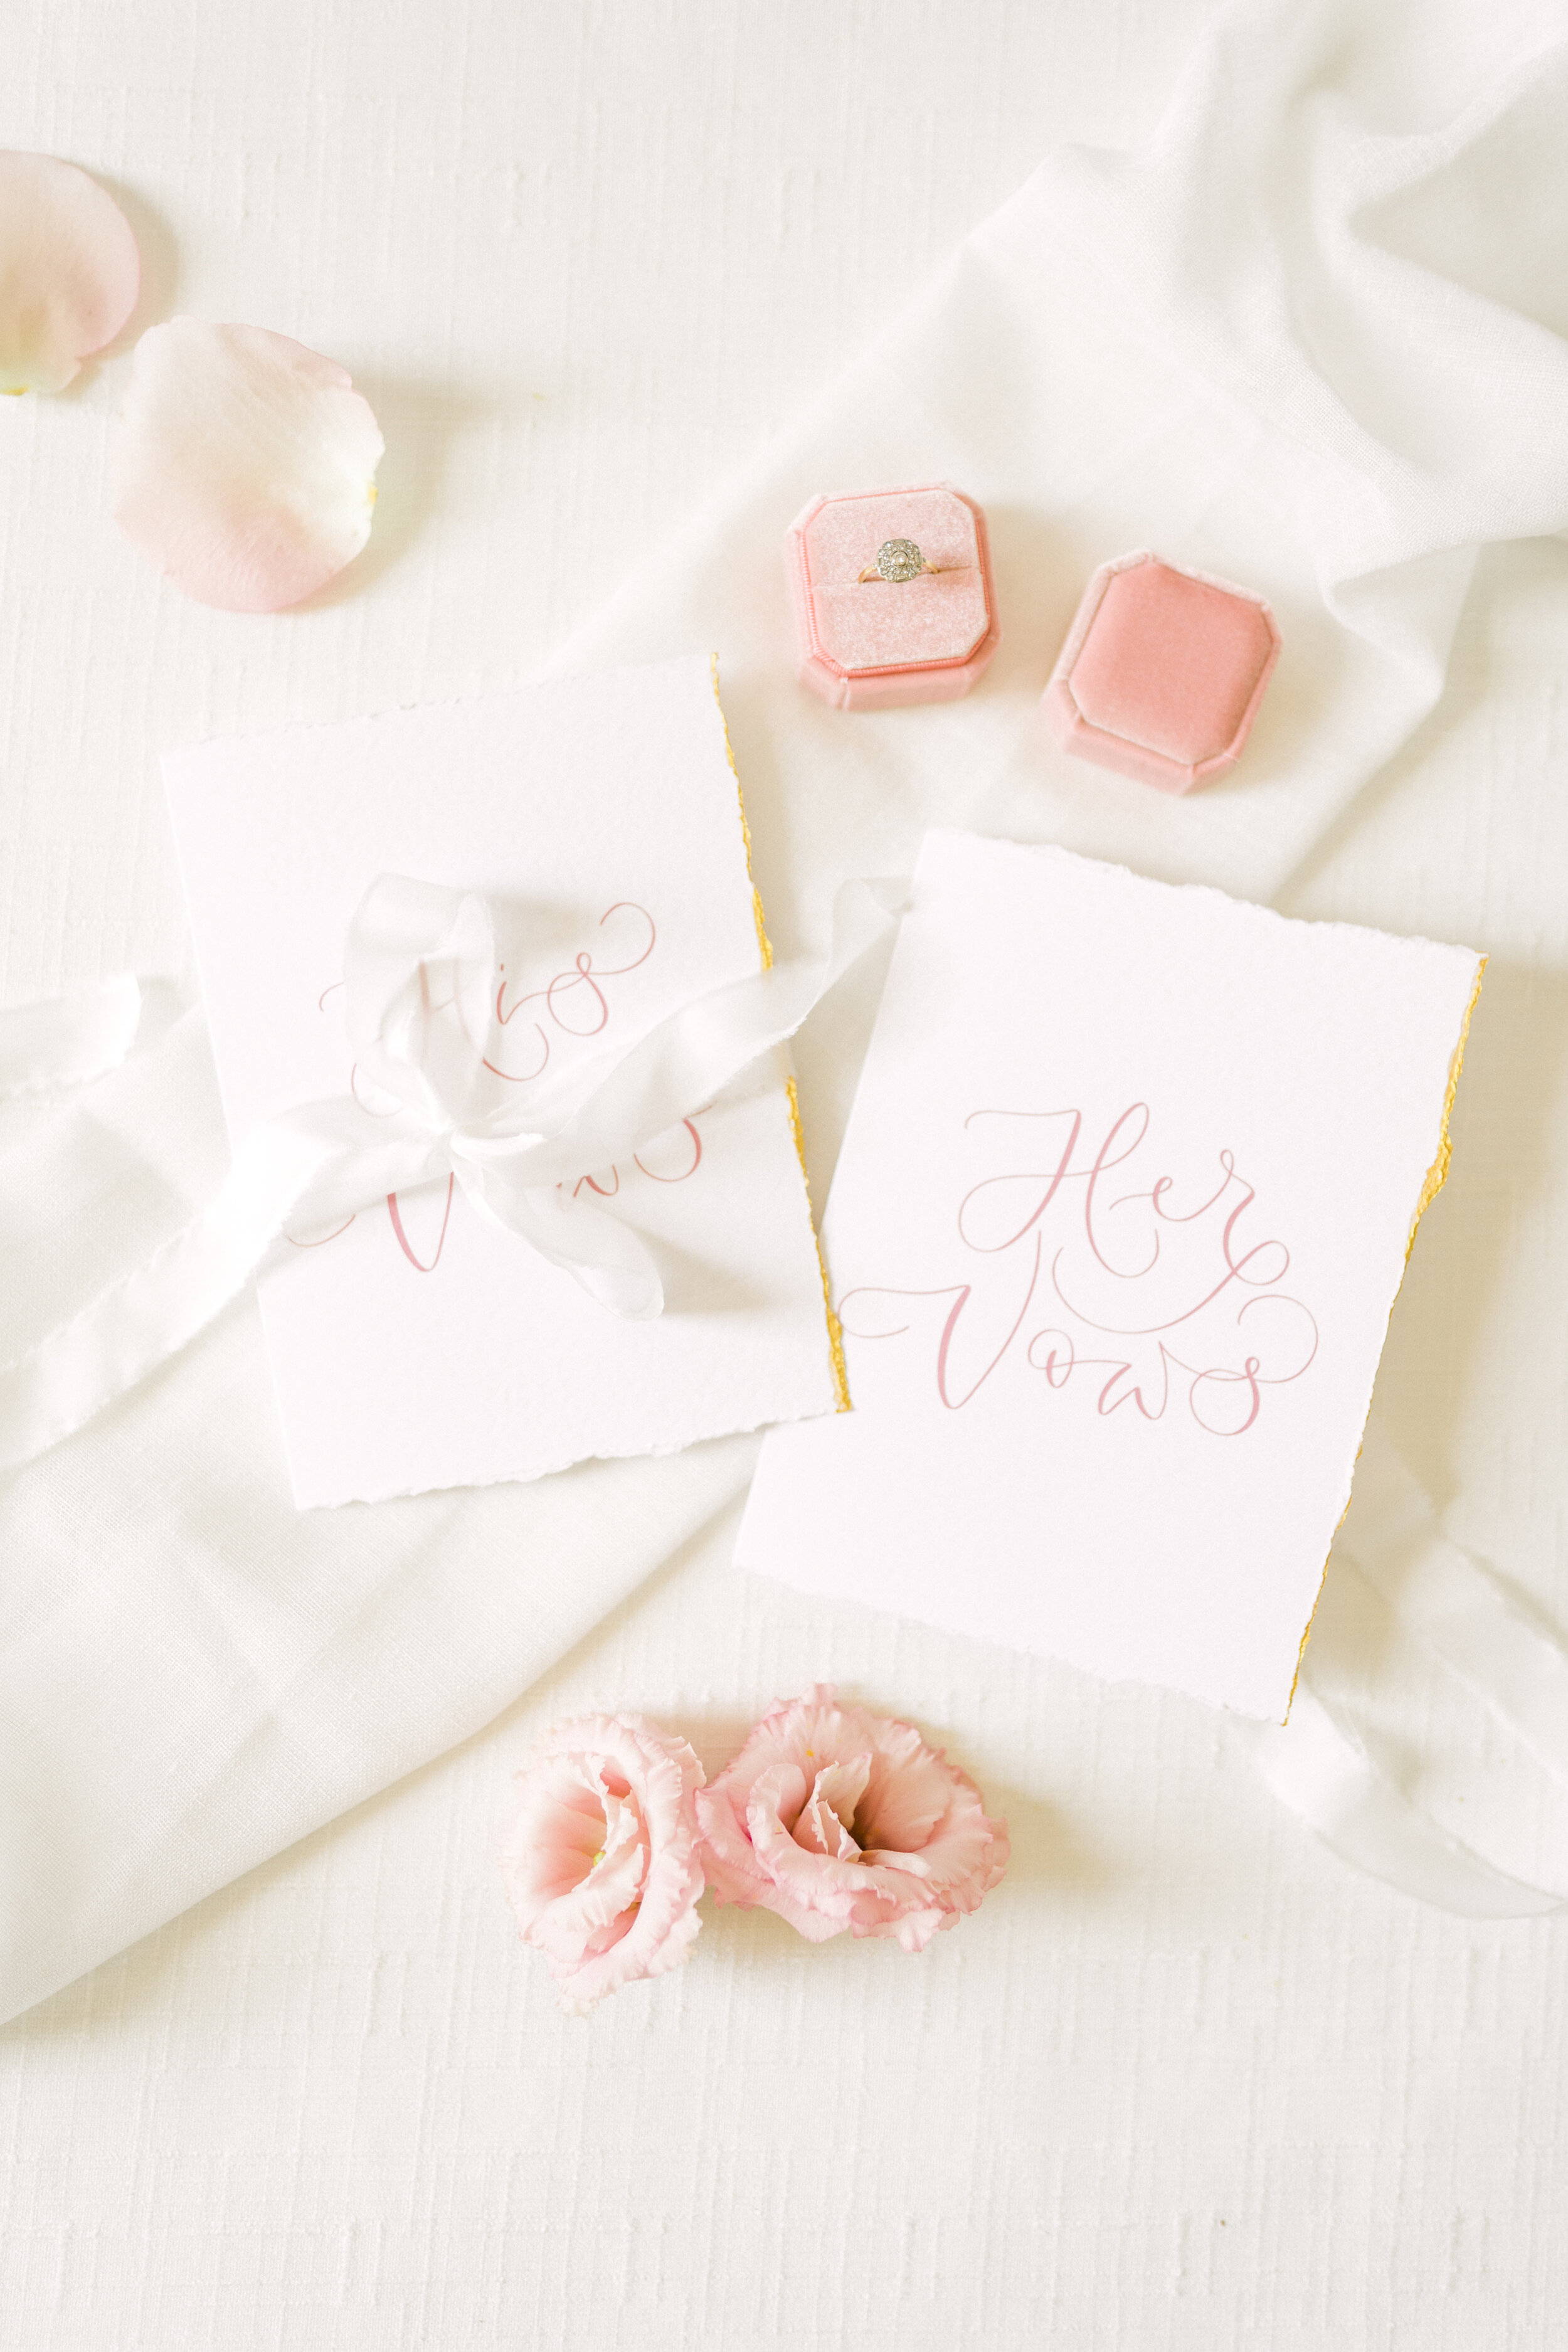 Luxury vow calligraphy vow books by the amyverse - blush pink and gold - Her vows and his vows.jpg